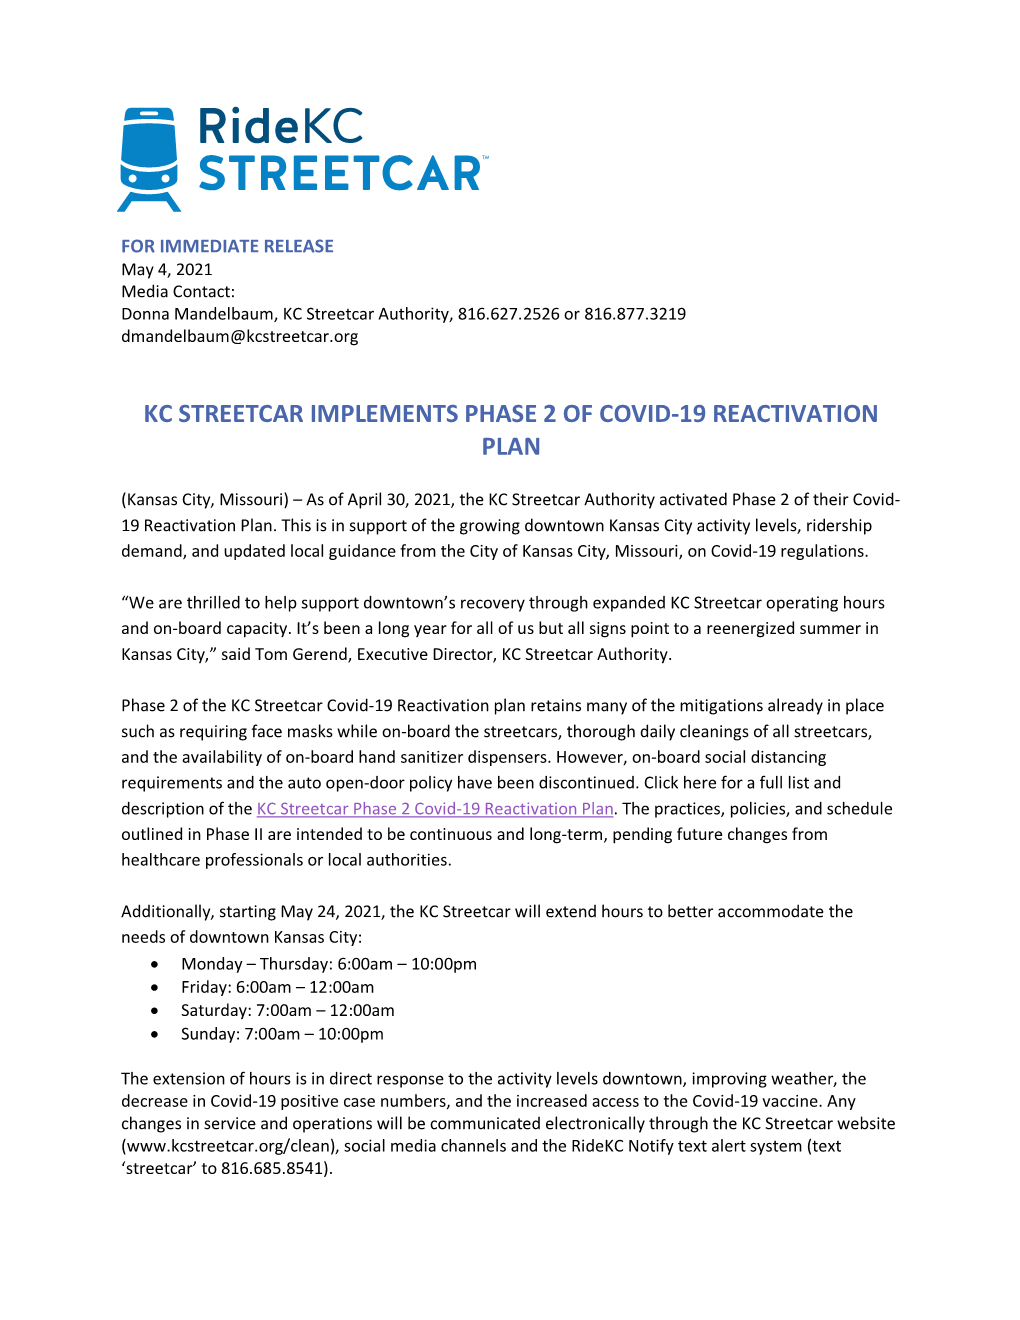 Kc Streetcar Implements Phase 2 of Covid-19 Reactivation Plan